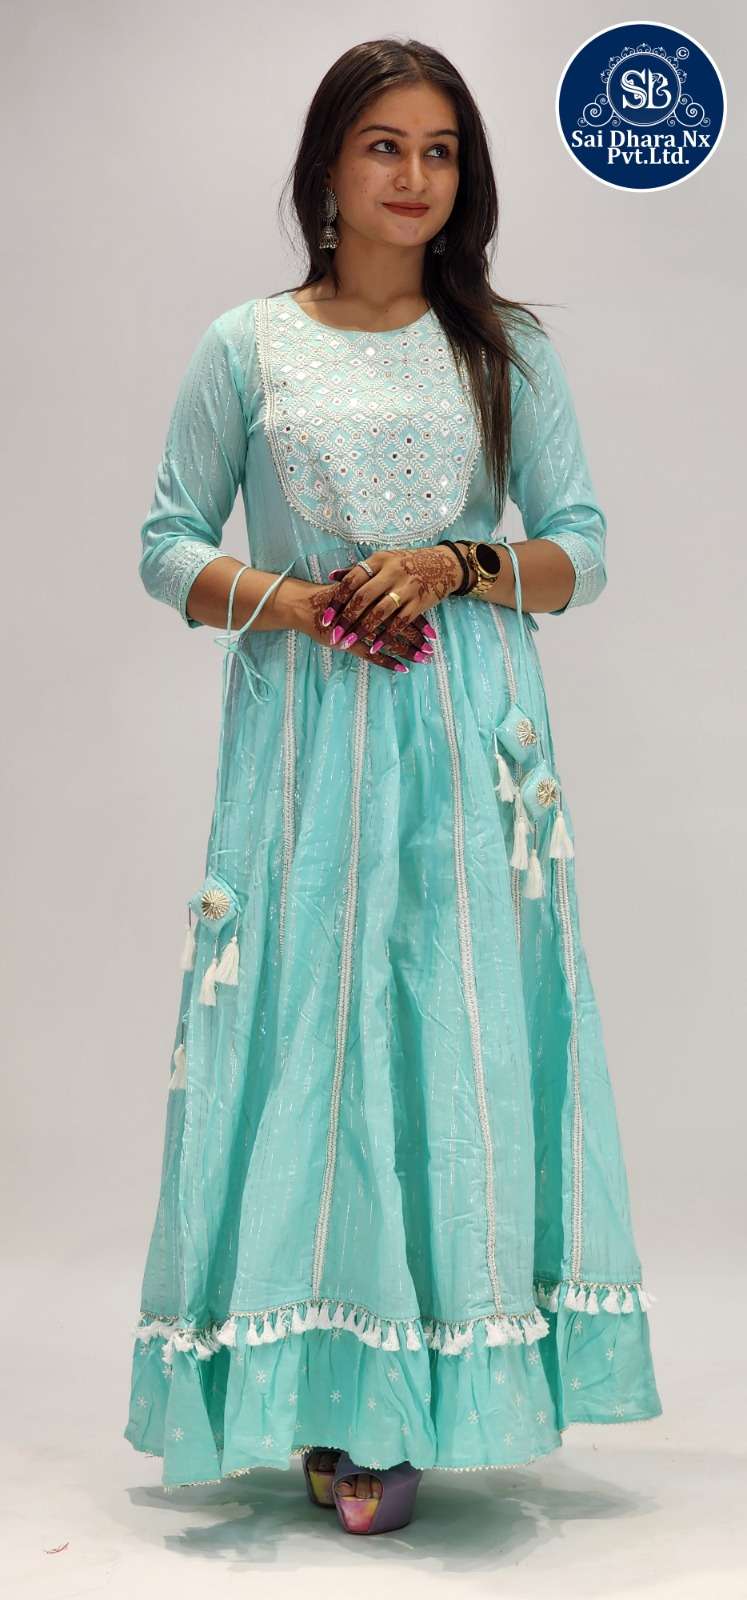 SAIDHARANX PRESENTS COTTON LATEST DESIGN PRINTED SKY BLUE GOWN READYMADE COMBO COLLECTION WHOLESALE SHOP IN SURAT - SaiDharaNx